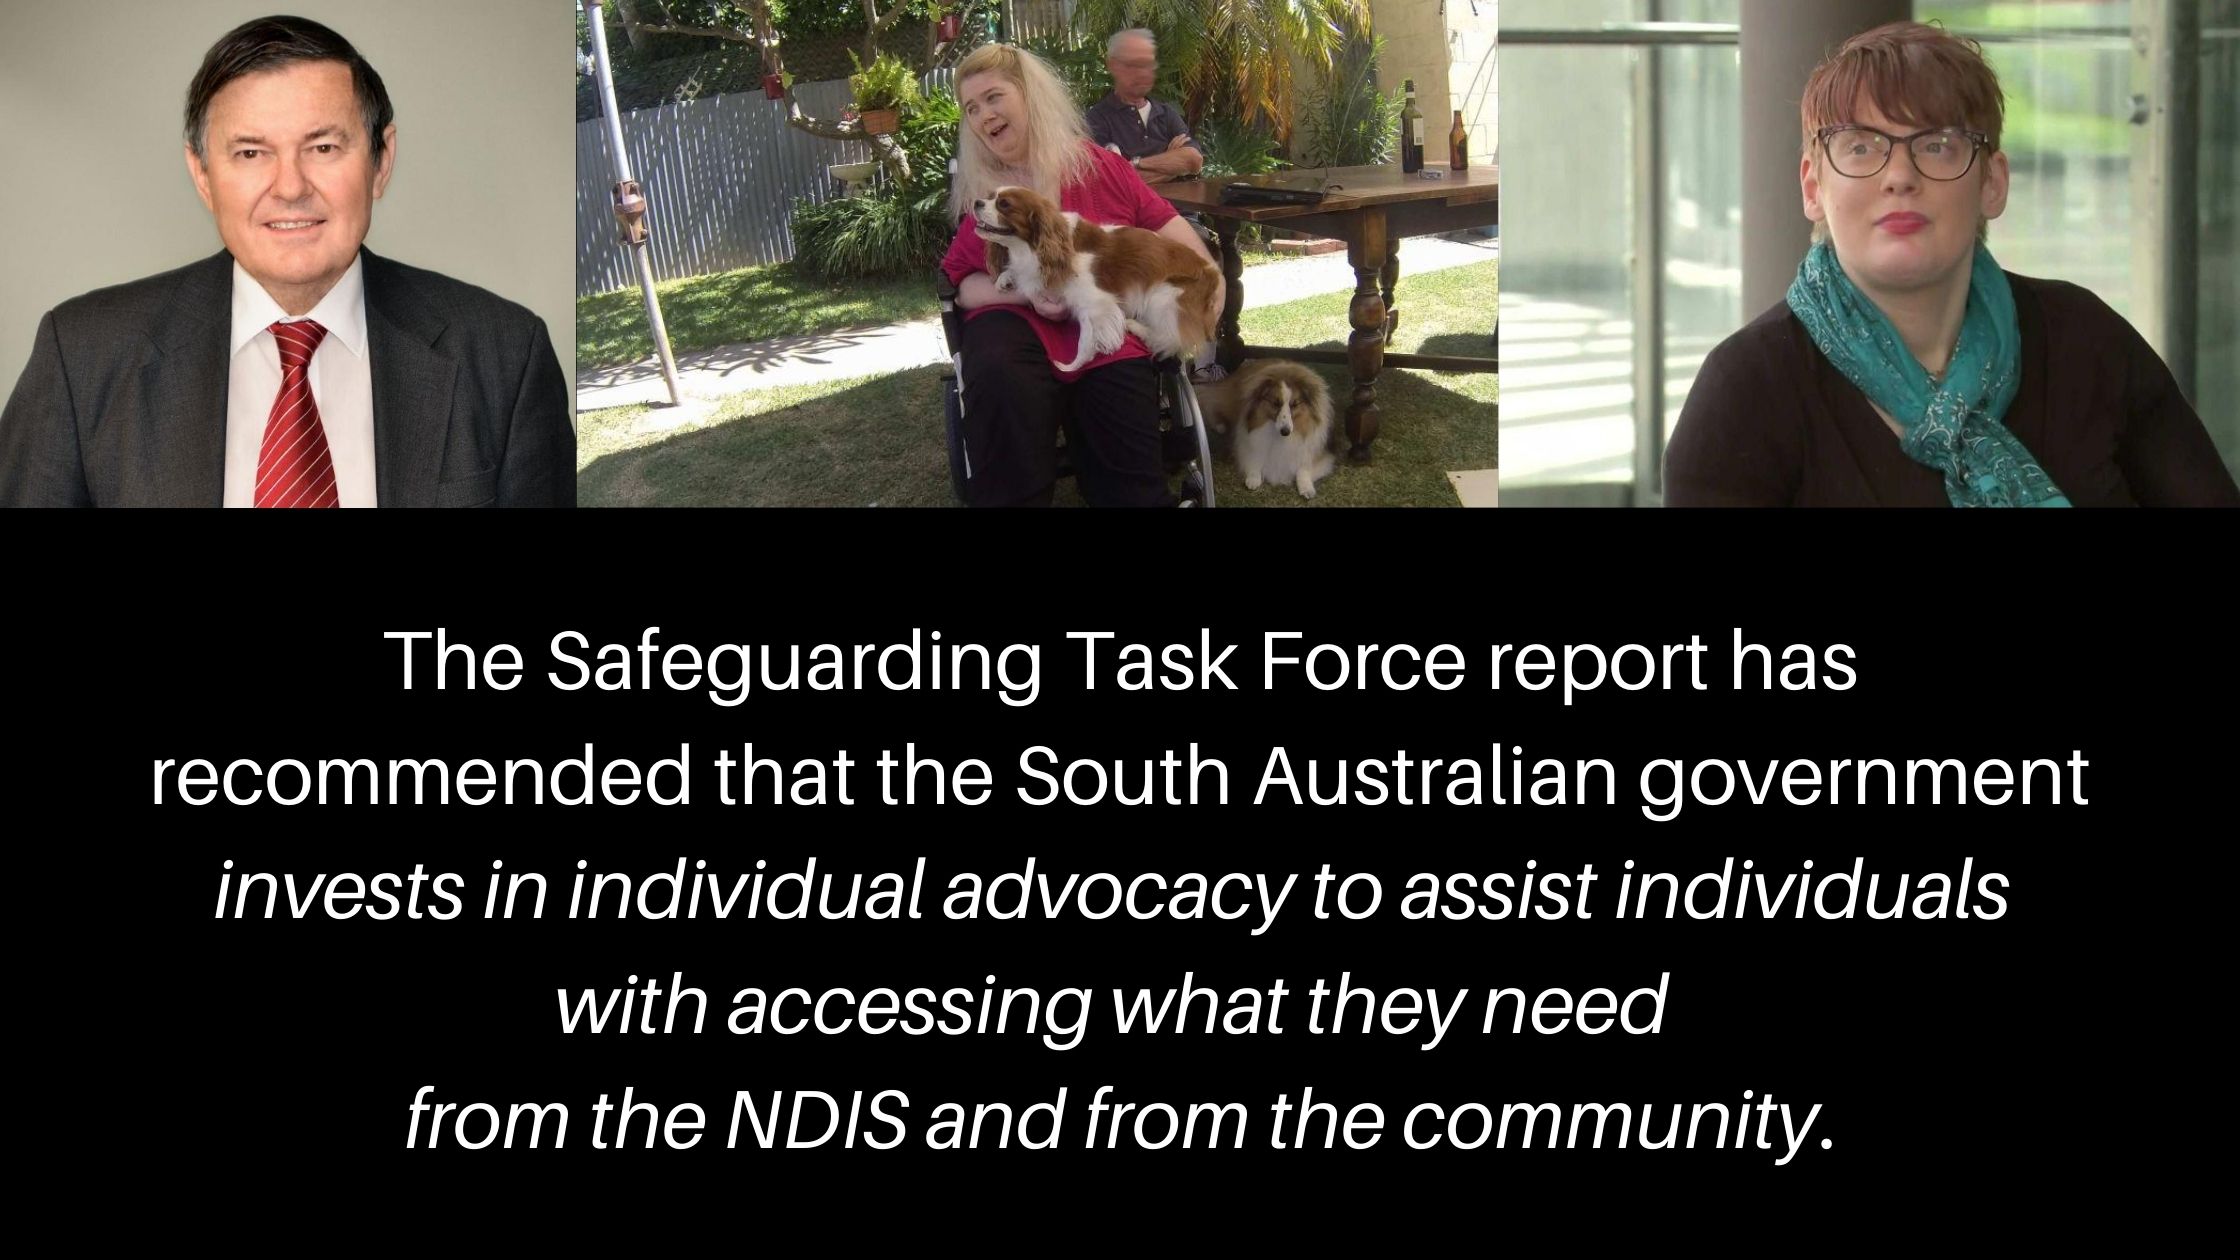 Pictures of Ann Marie Smith and Co-Chairs of Safeguarding Task Force, David Caudrey and Kelly Vincent